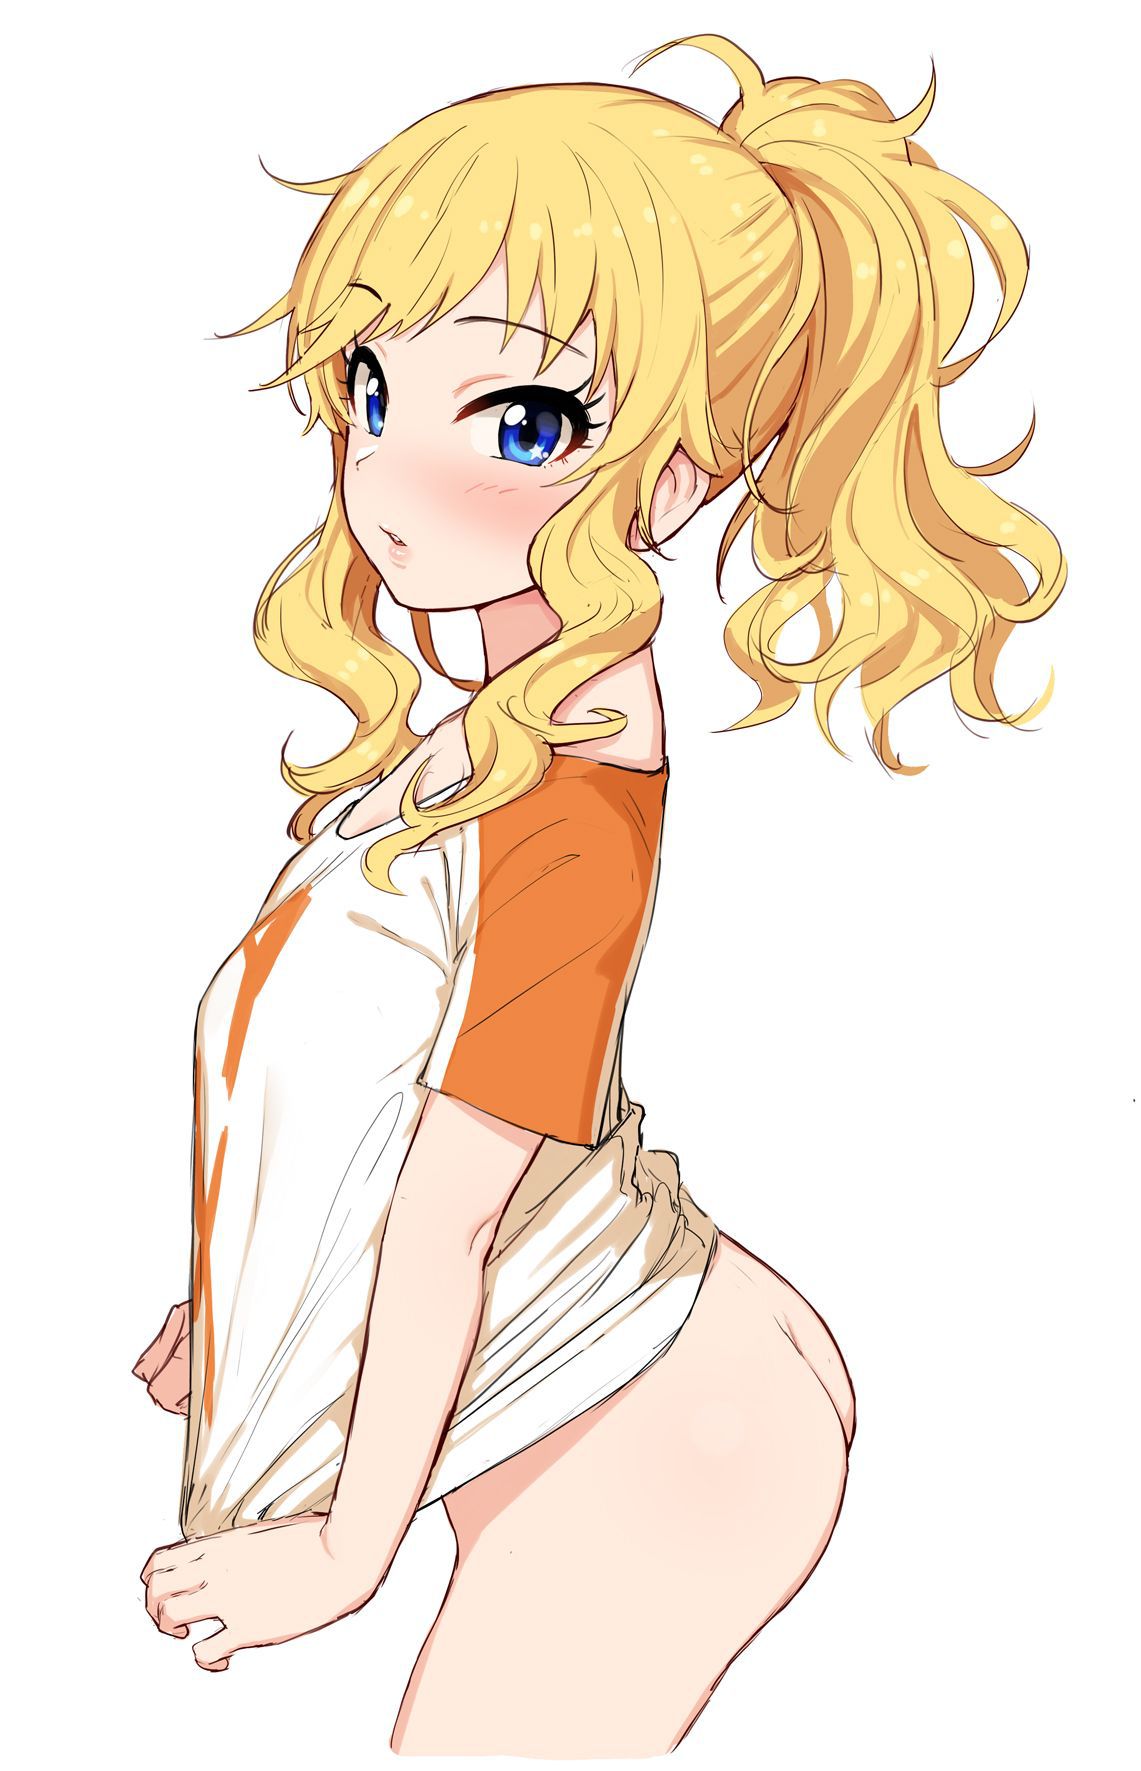 Secondary erotic image of a cute ponytail girl, 24 [ponytail] 17